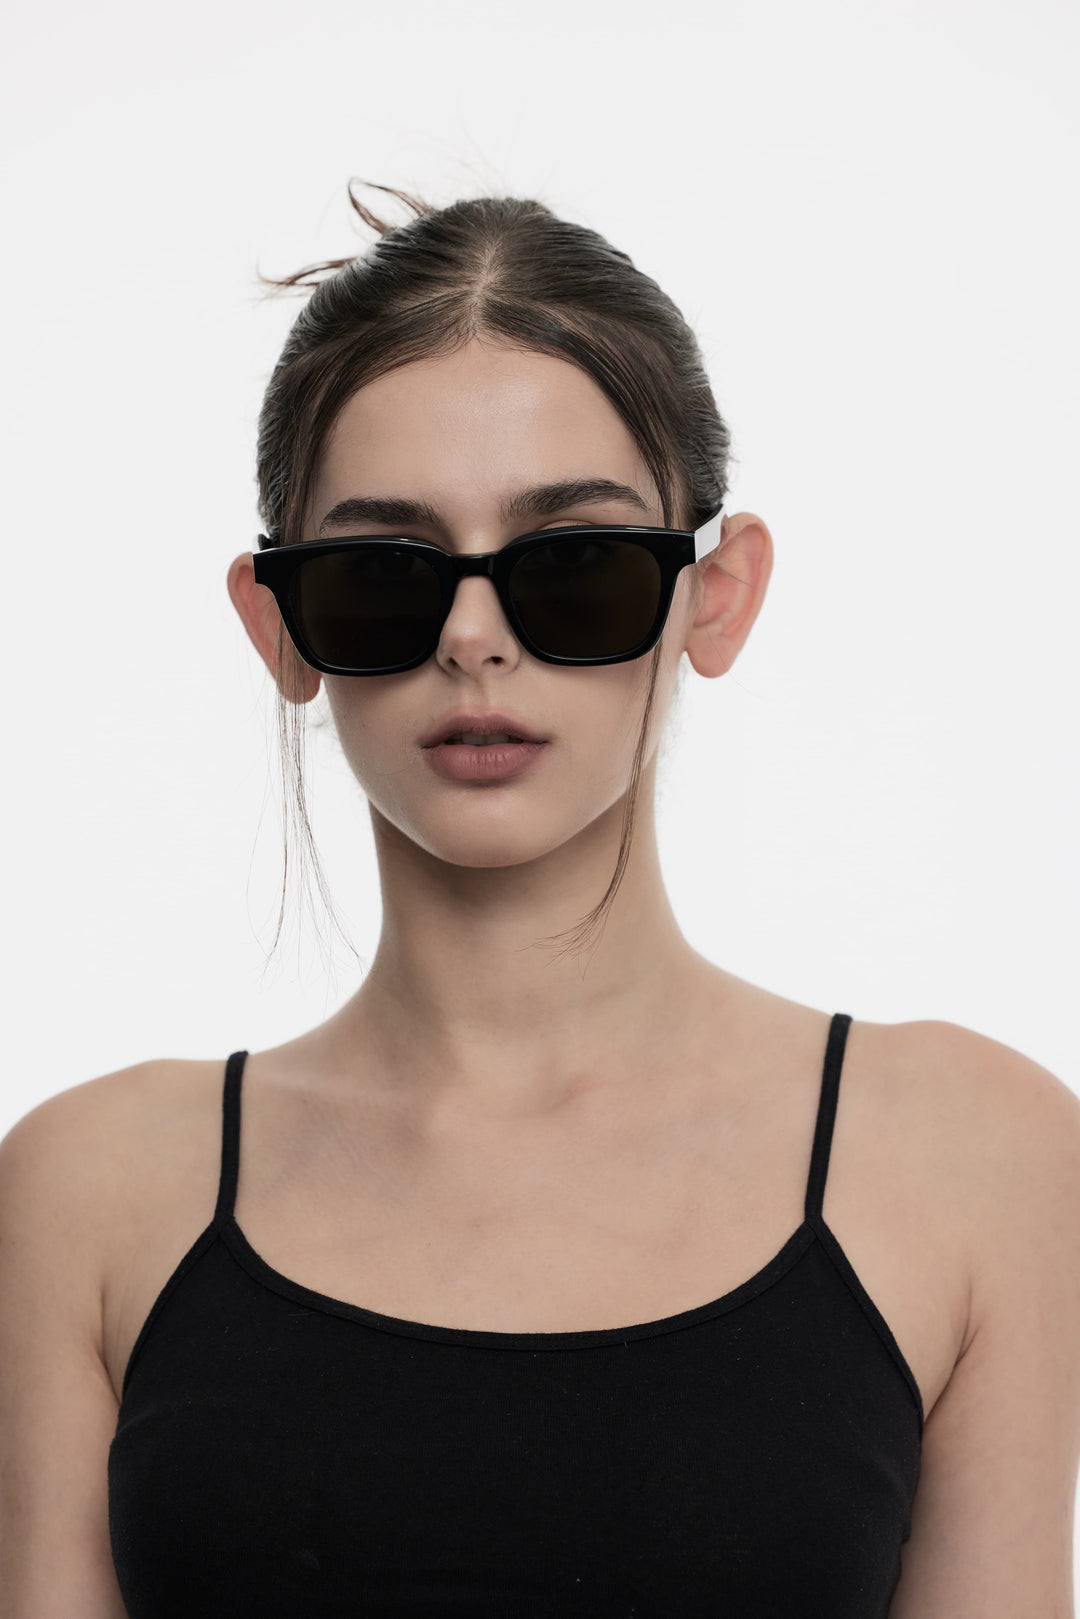 Female Model of her front face wearing Bubblegum in black trendy square sunglasses from Mercury Retrograde Daydream’s Collection 